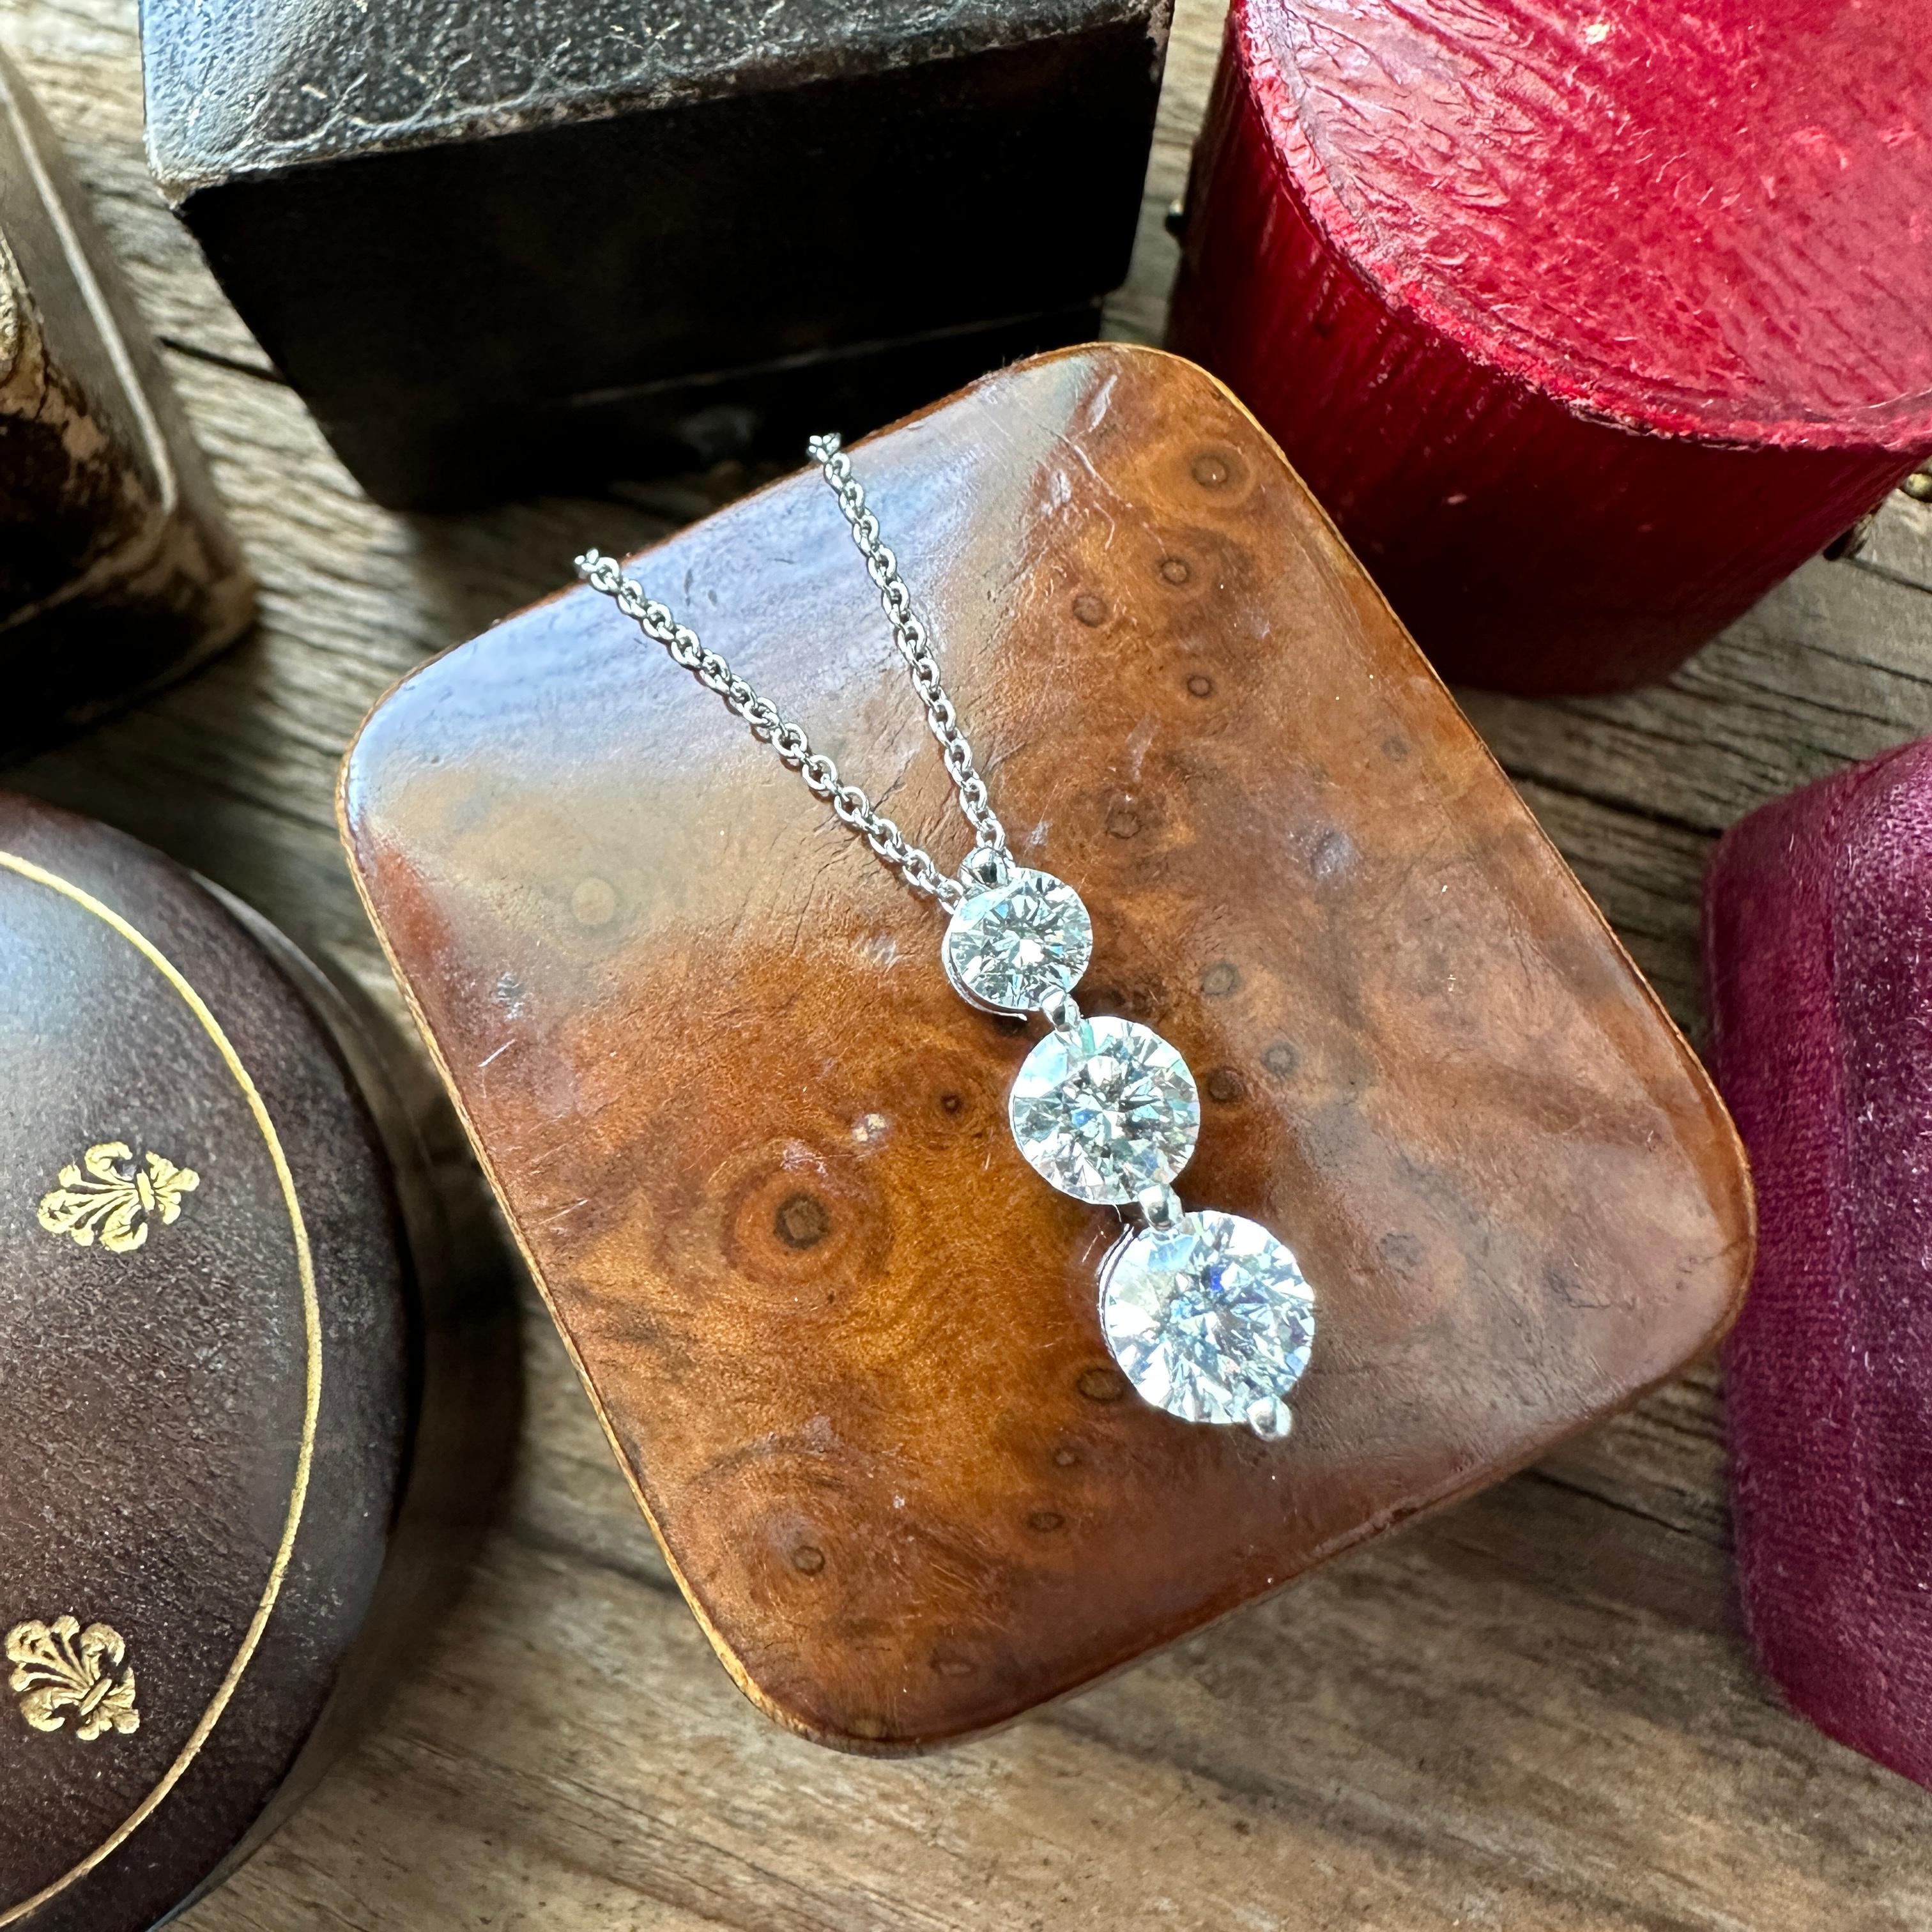 Details:
Fabulous classic vintage triple diamond drop pendant set in 18K white gold. Perfect EVERYDAY necklace with just the right amount of bling! The diamonds total weight is 1.5 carats, and they are round brilliant cuts. This piece is gorgeous,